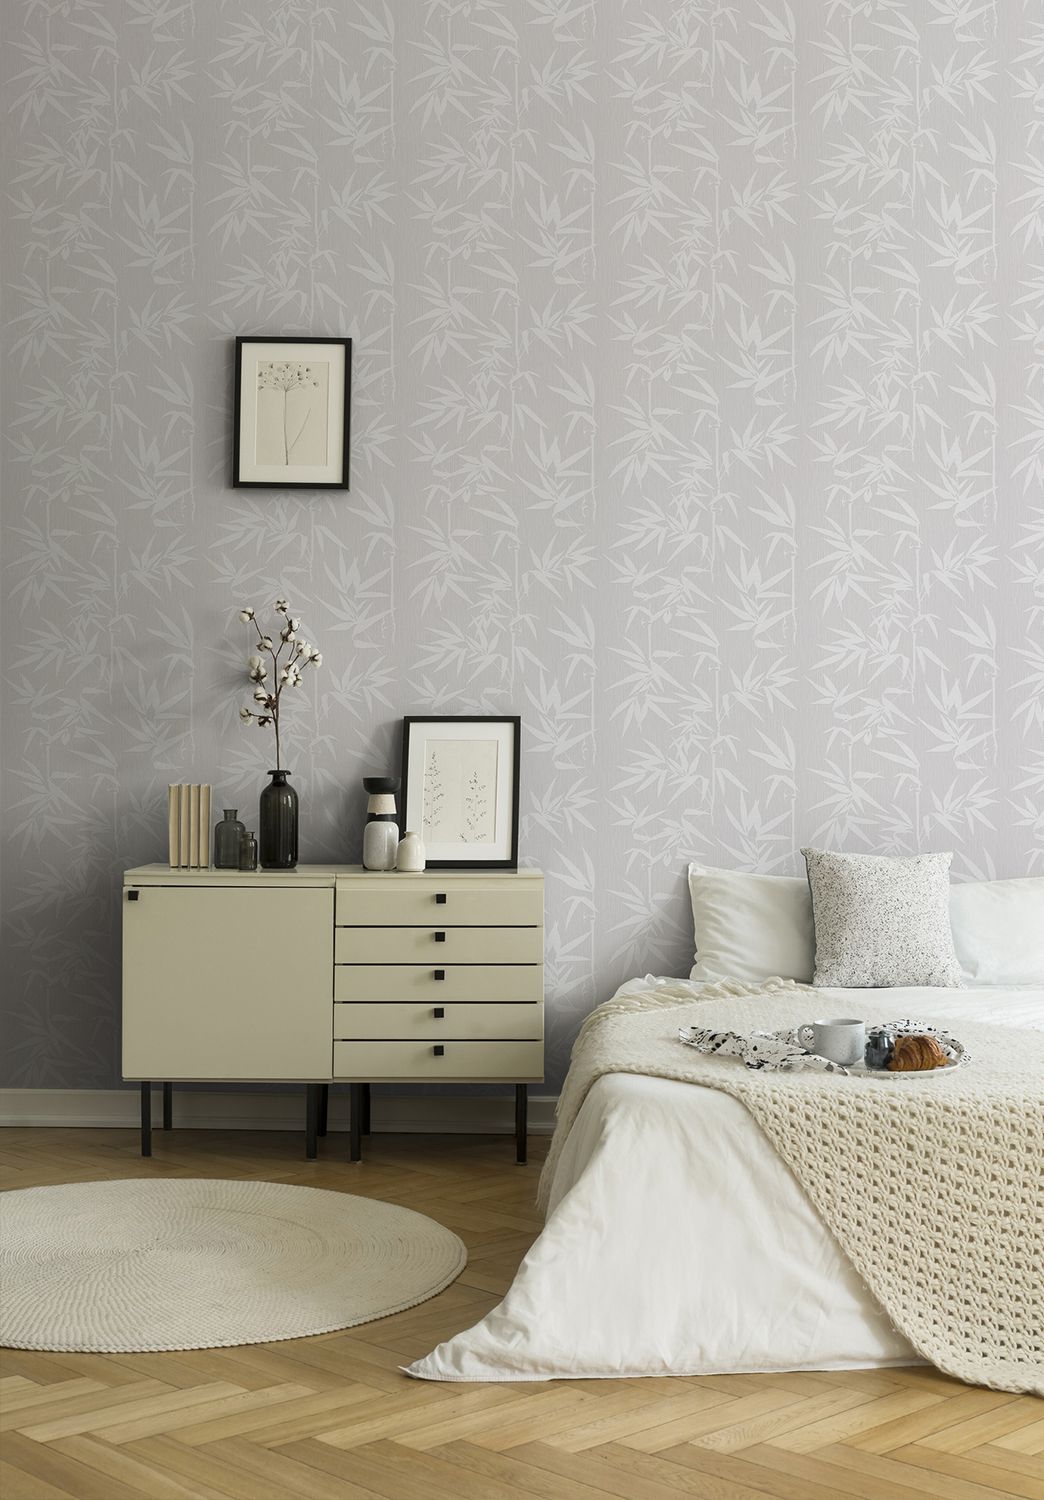 Bedroom with nature design wallpaper in light grey AS293633